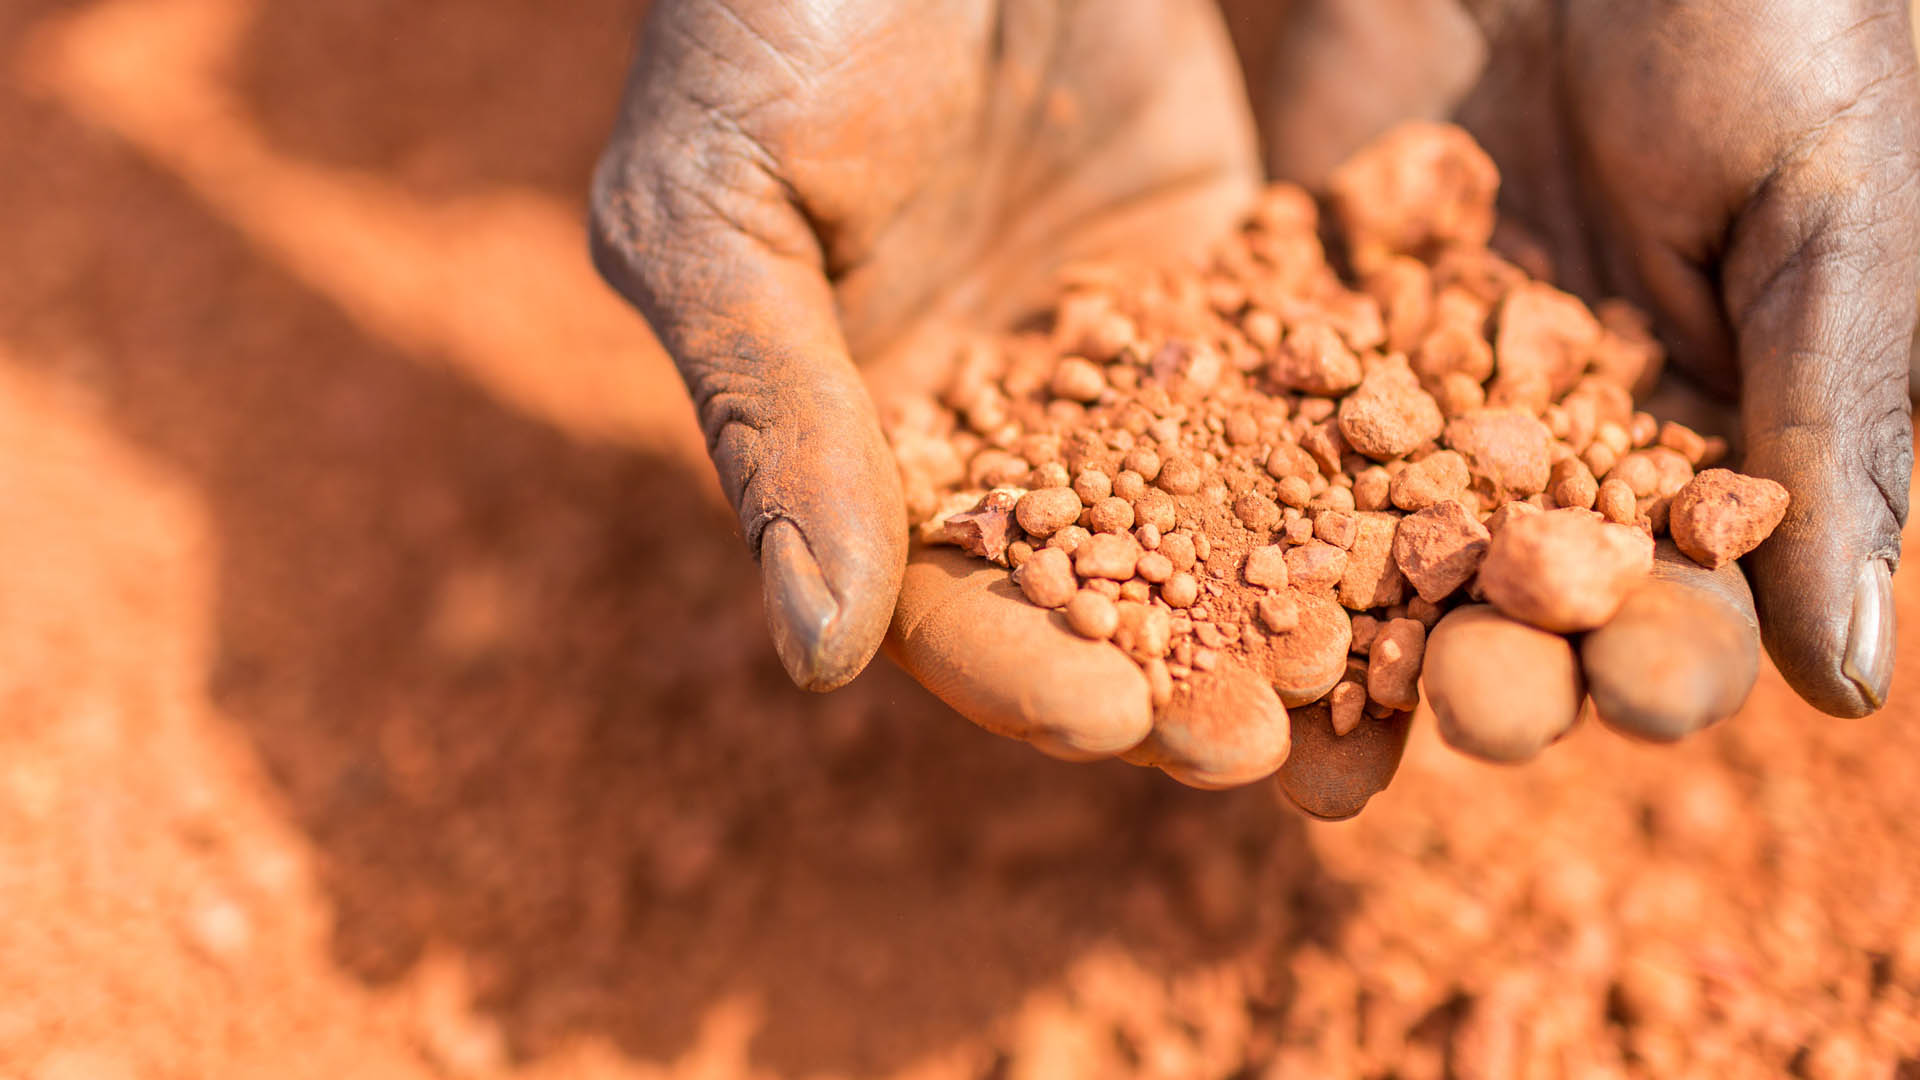 Hands scooping up red soil